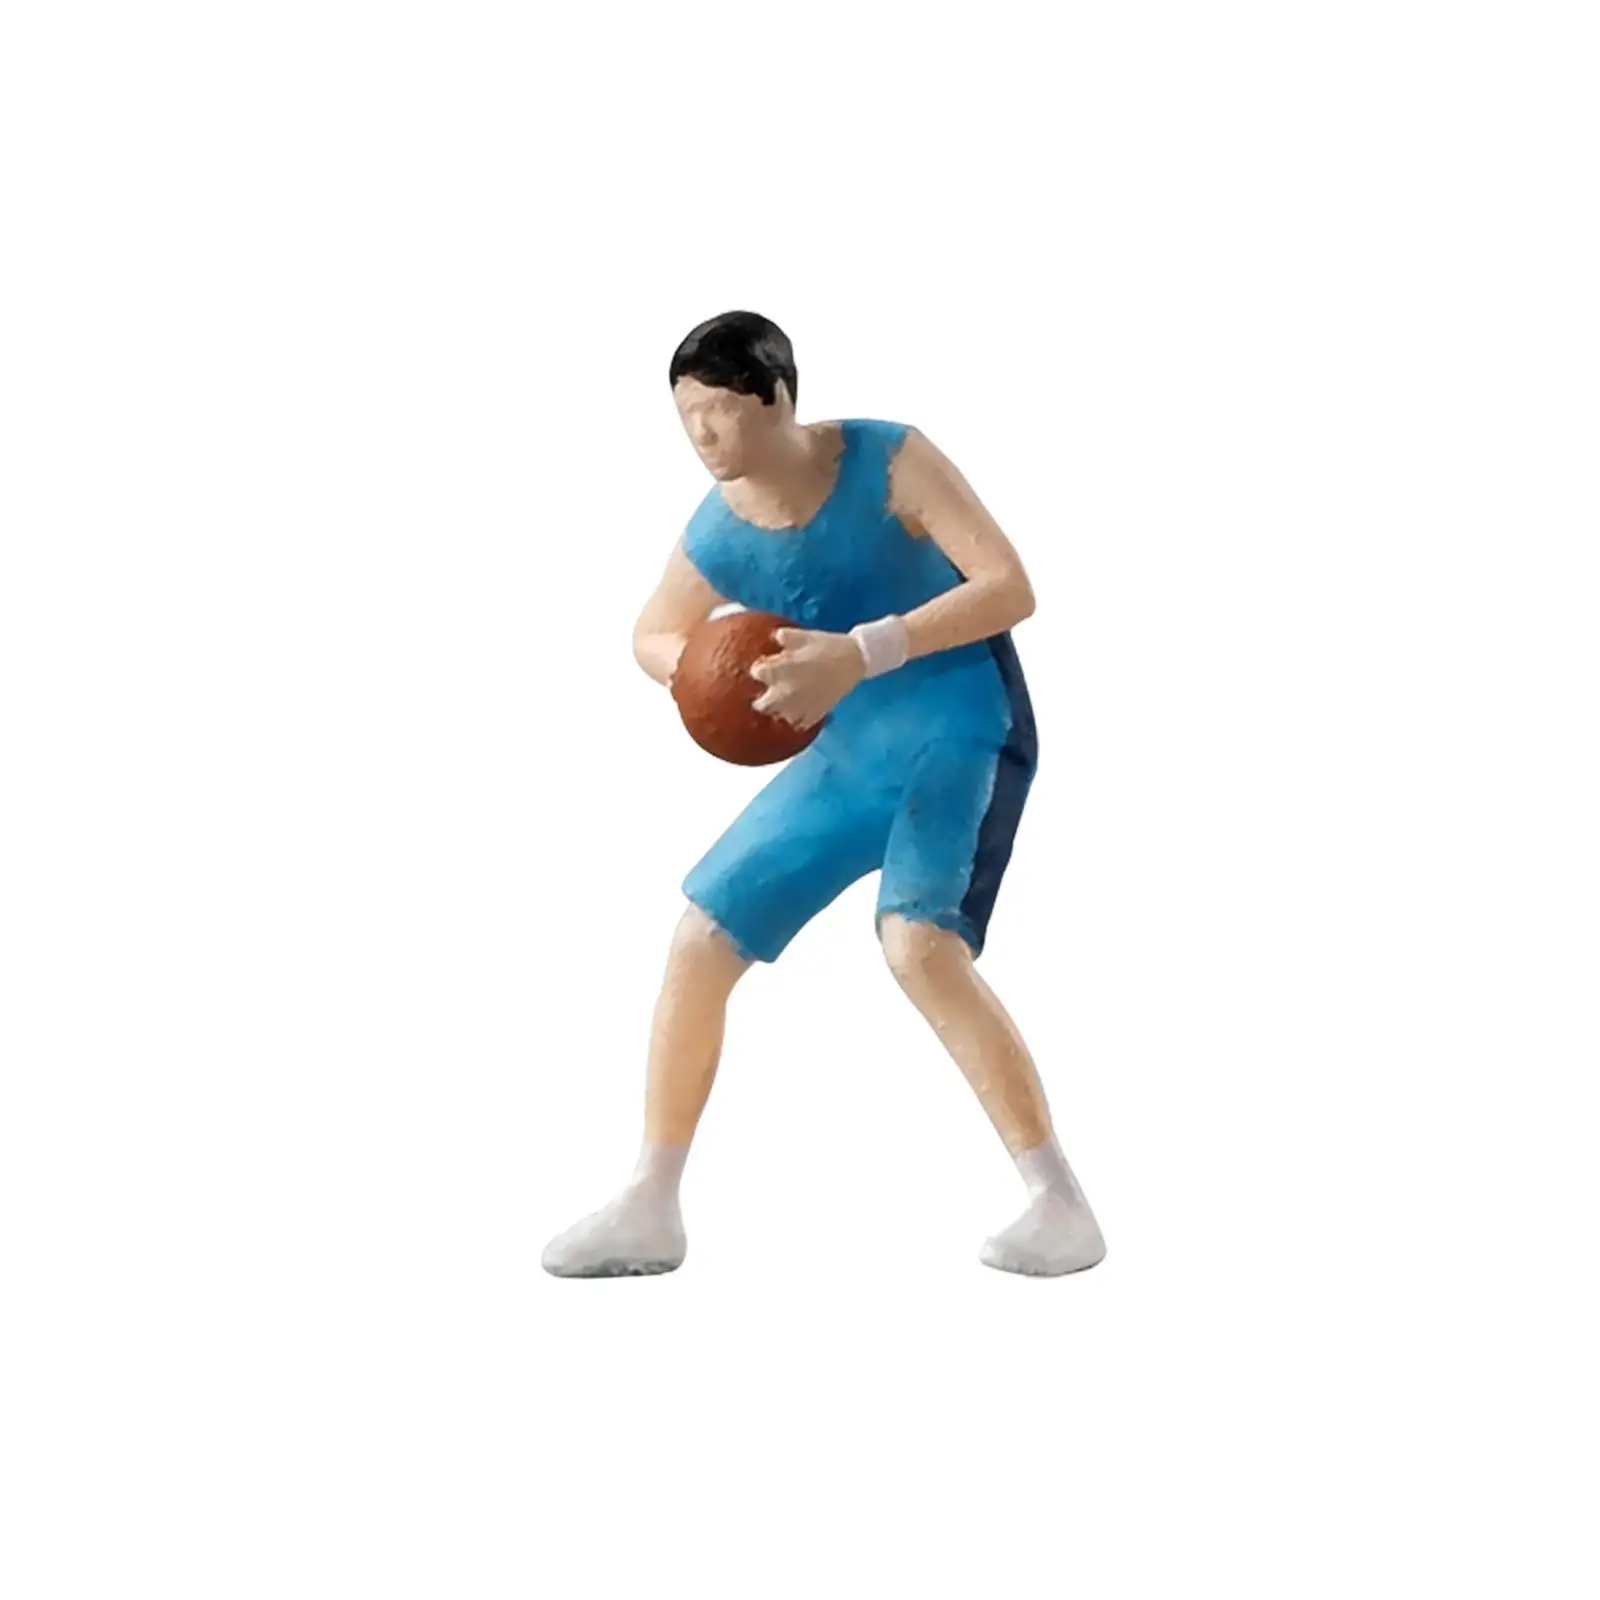 1:64 People Figures Sand Table Ornament Crafts Collectibles Basketball Boy Figures for Dollhouse Diorama DIY Scene Ornament